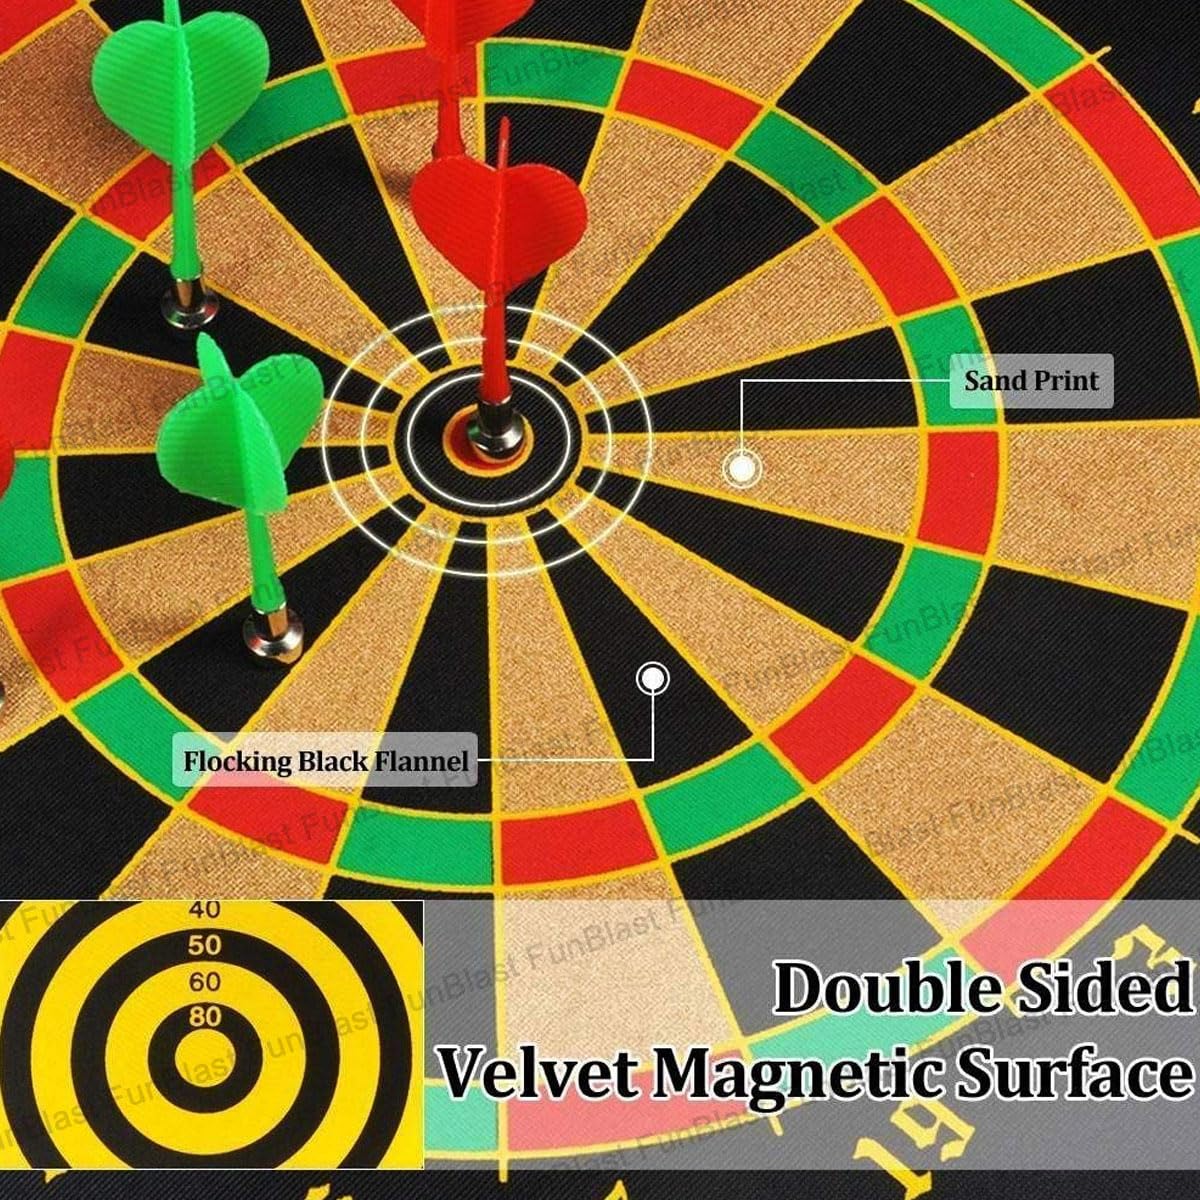 Magnetic Dart Game (Large) at best price in New Delhi by Toy Age India